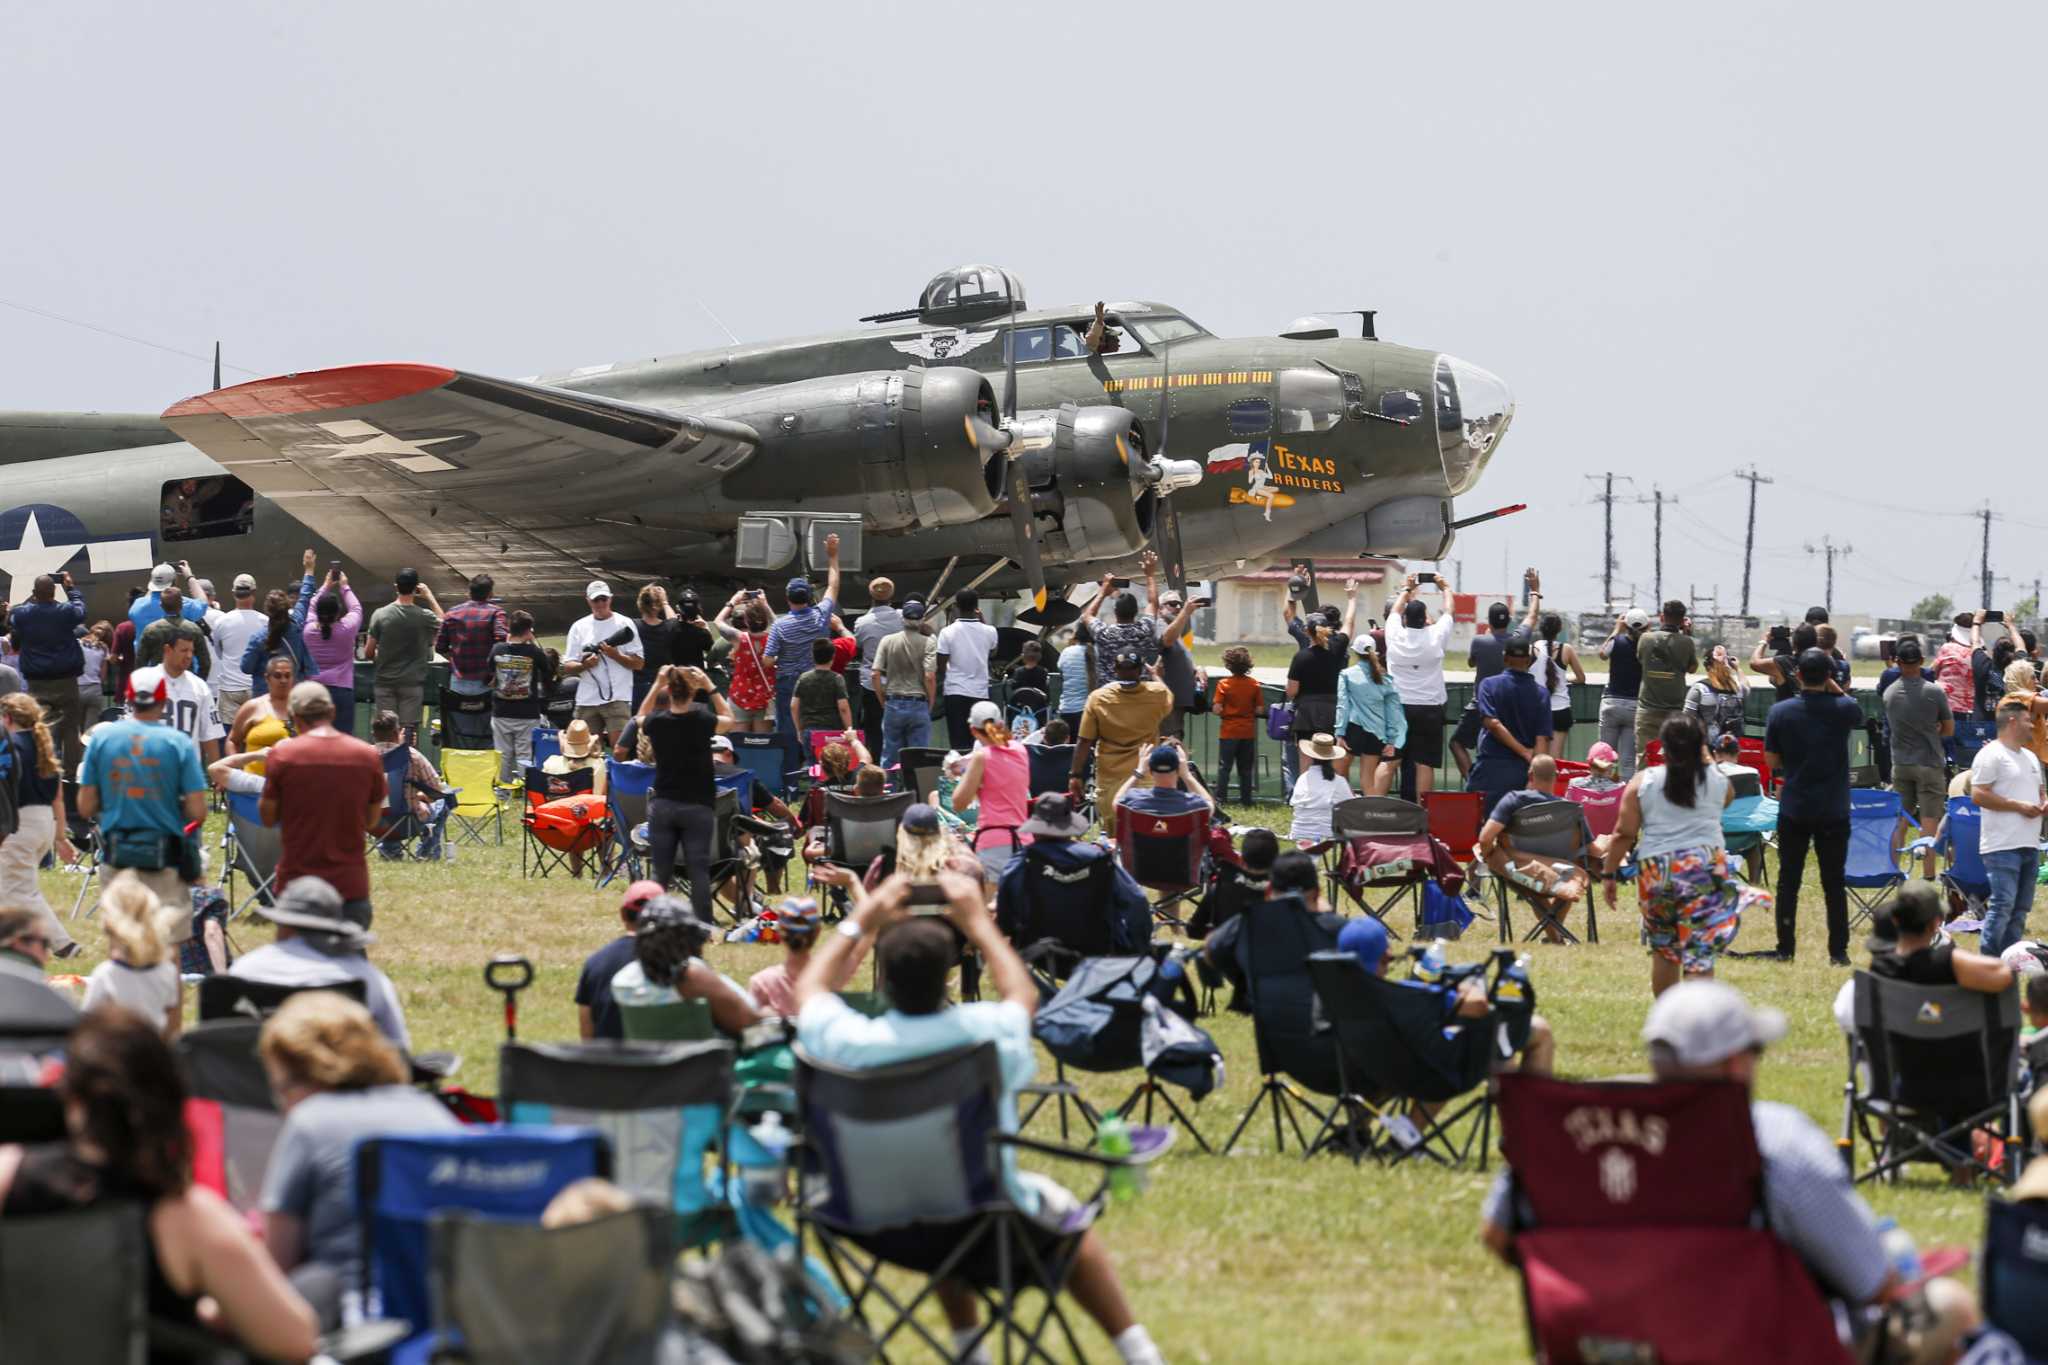 Randolph AFB residents denied entry during Great Texas airshow